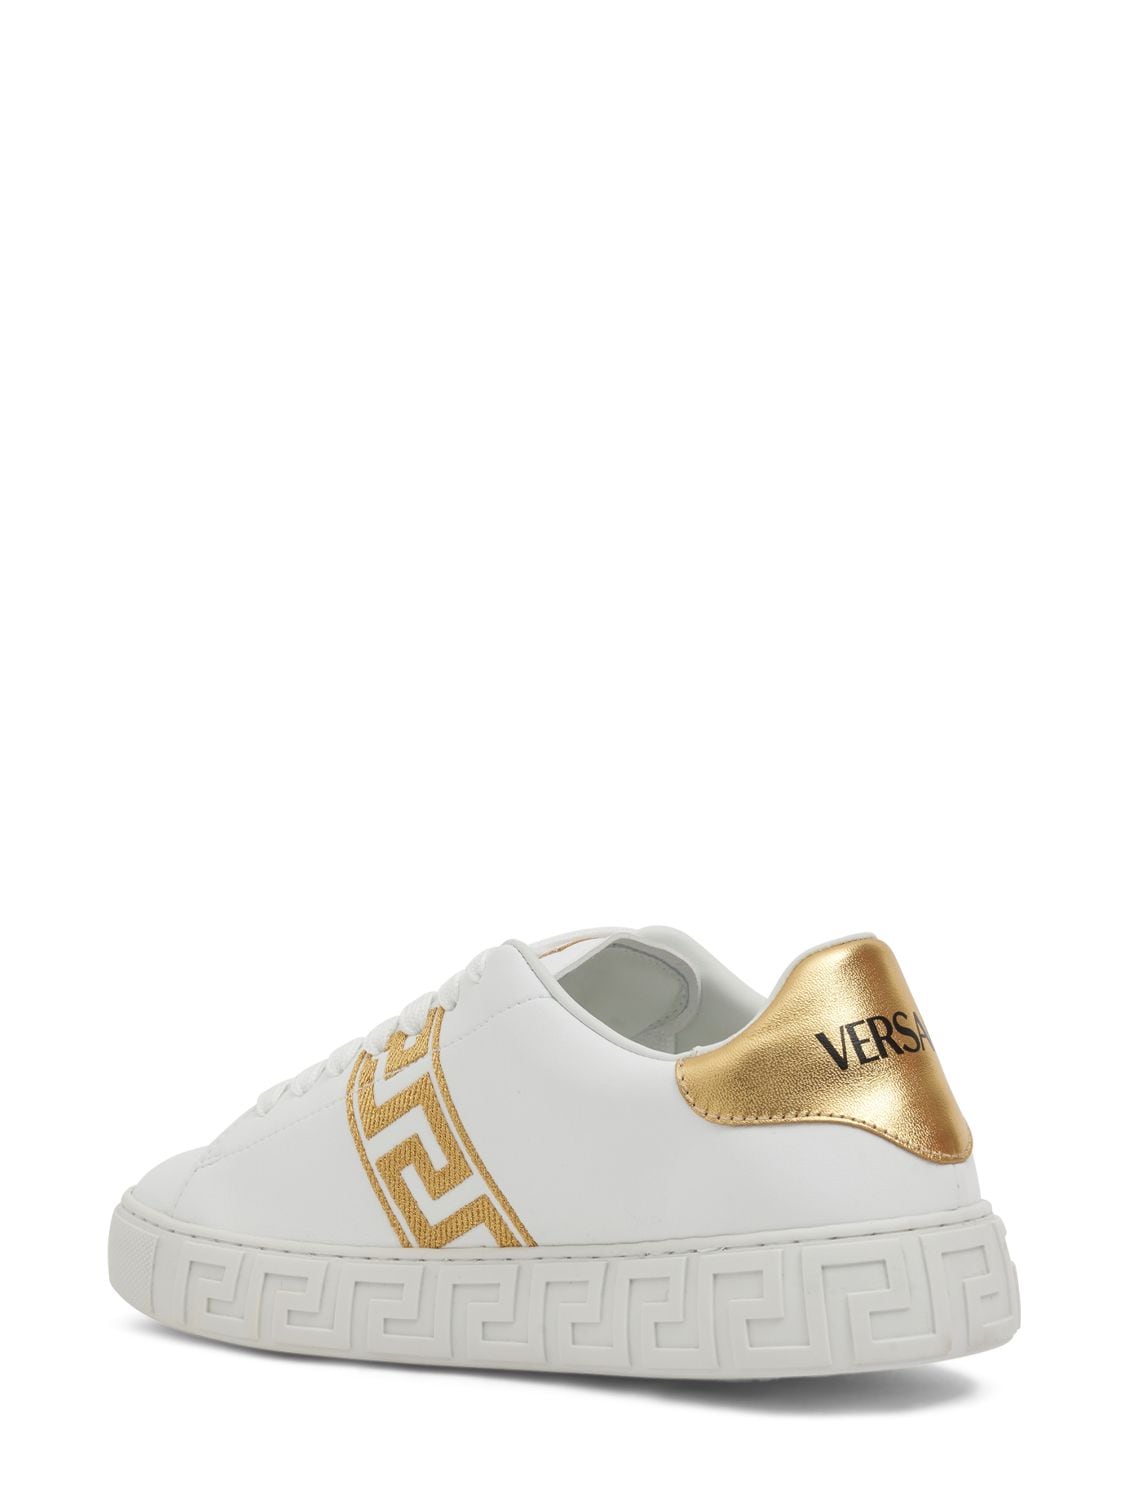 Shop Versace Faux Leather Sneakers W/ Embroidery In White,gold